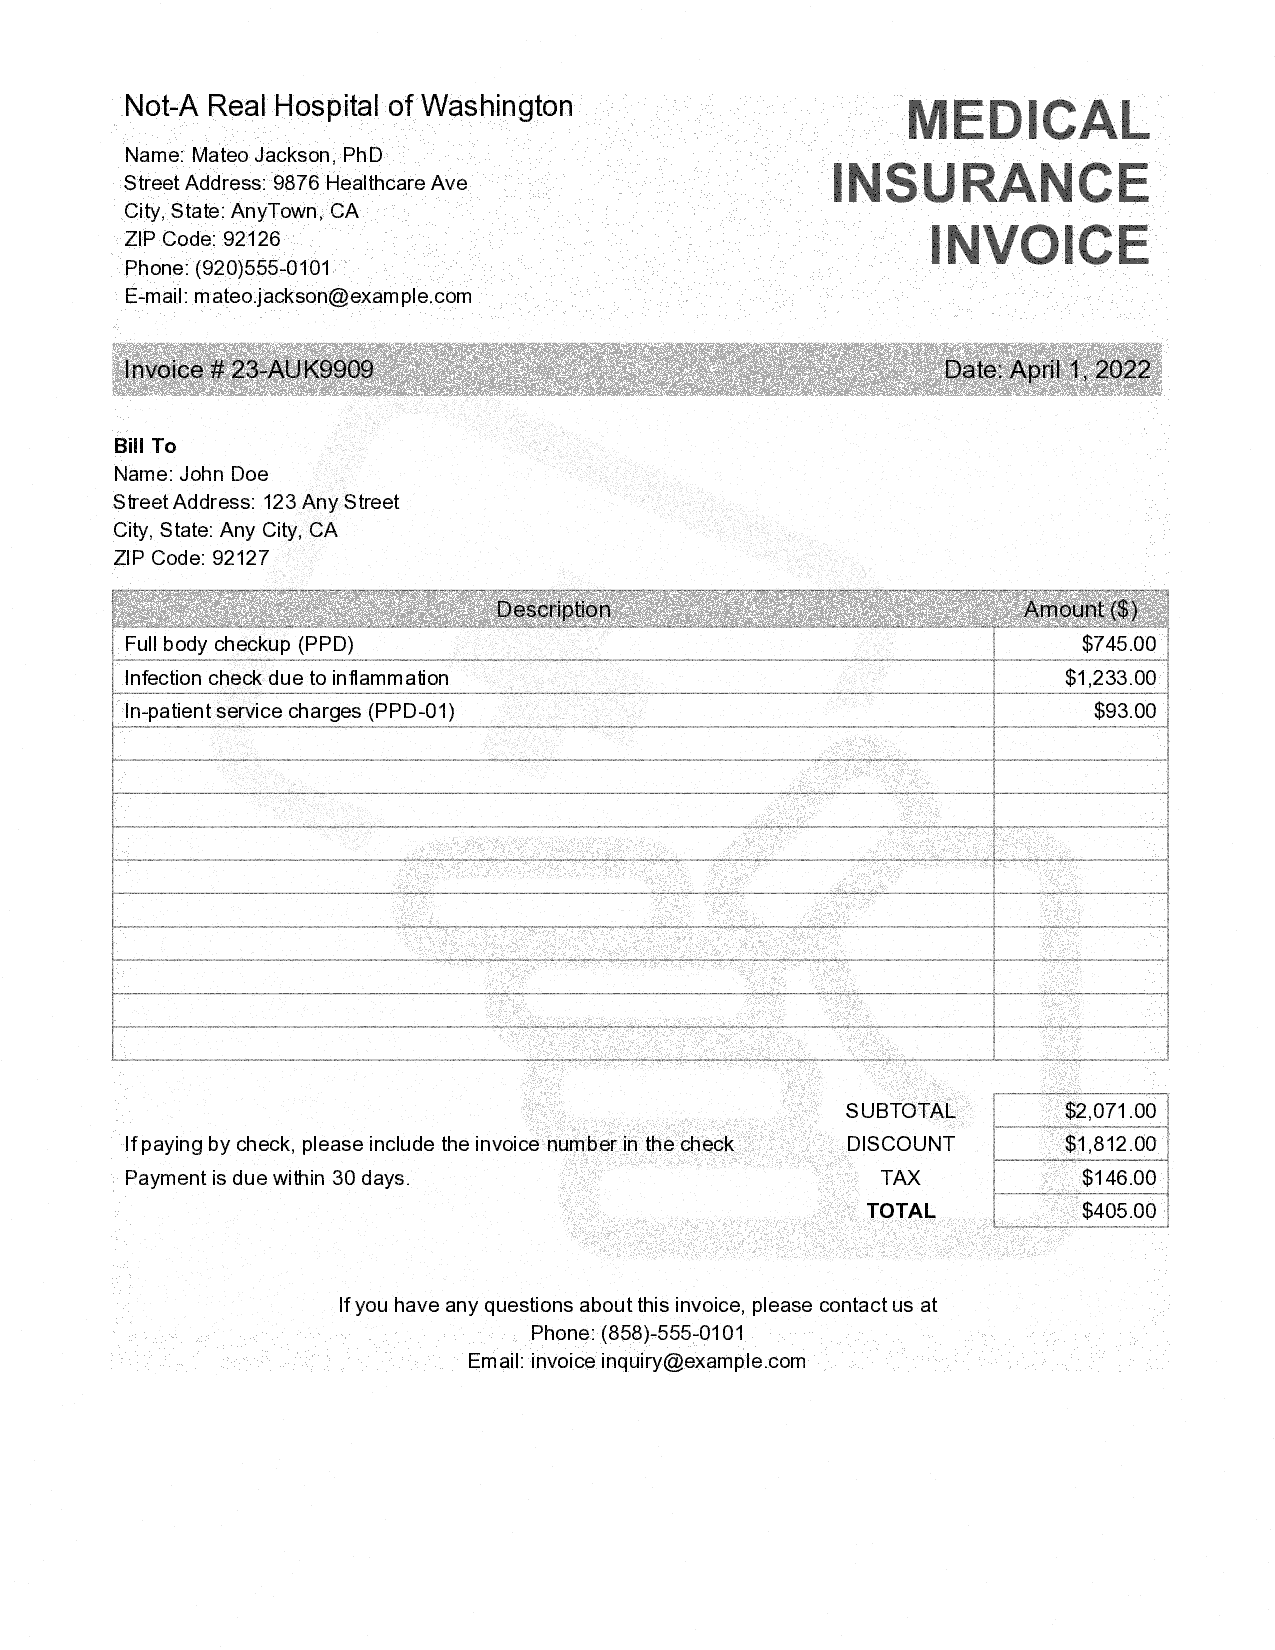 A sample of insurance invoice